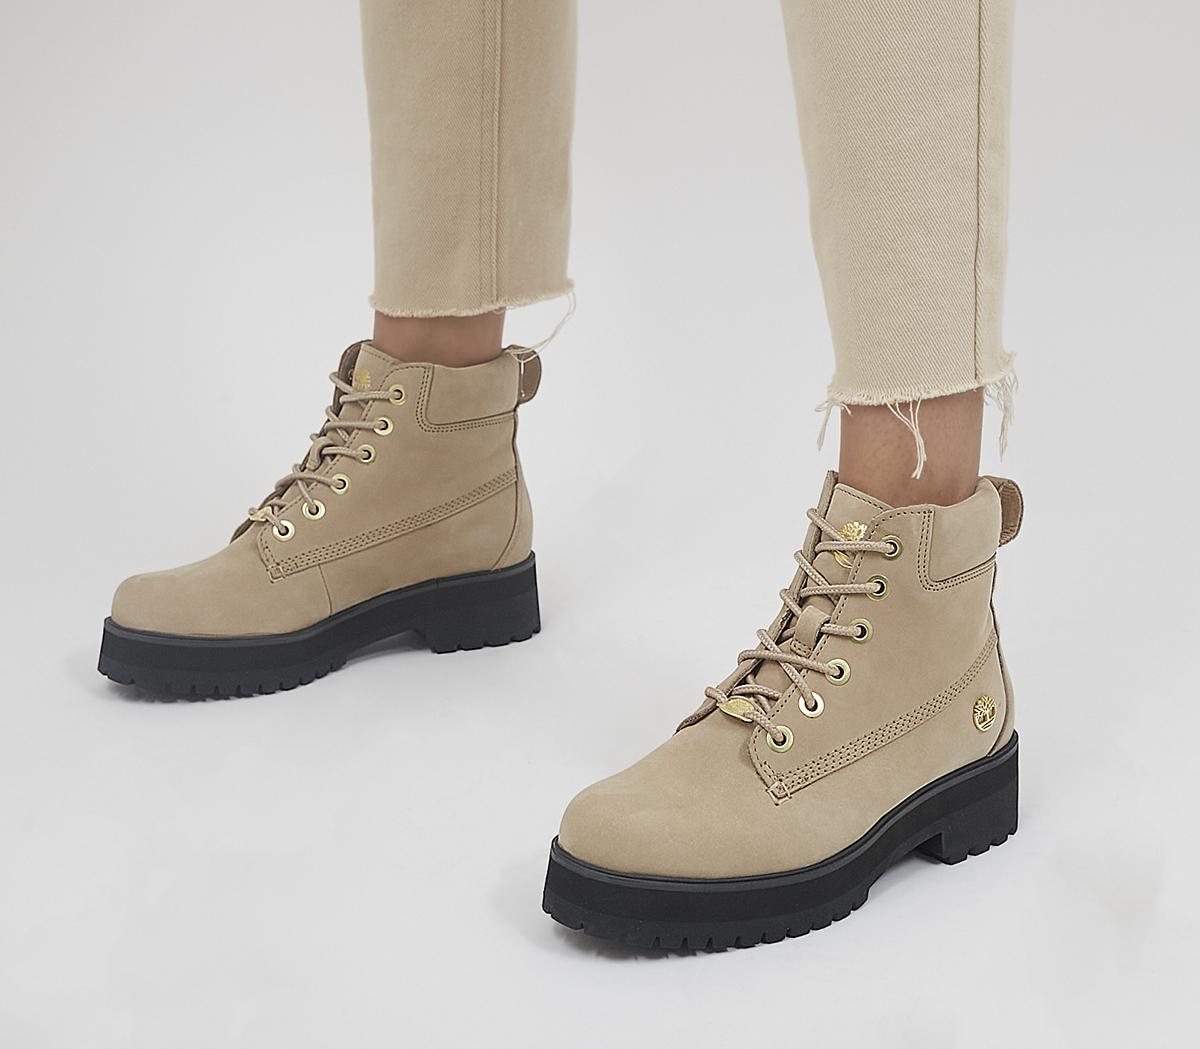 Timberland 6 Stack Boots Light Brown Nubuck - Nude Heels, Sandals & Shoes